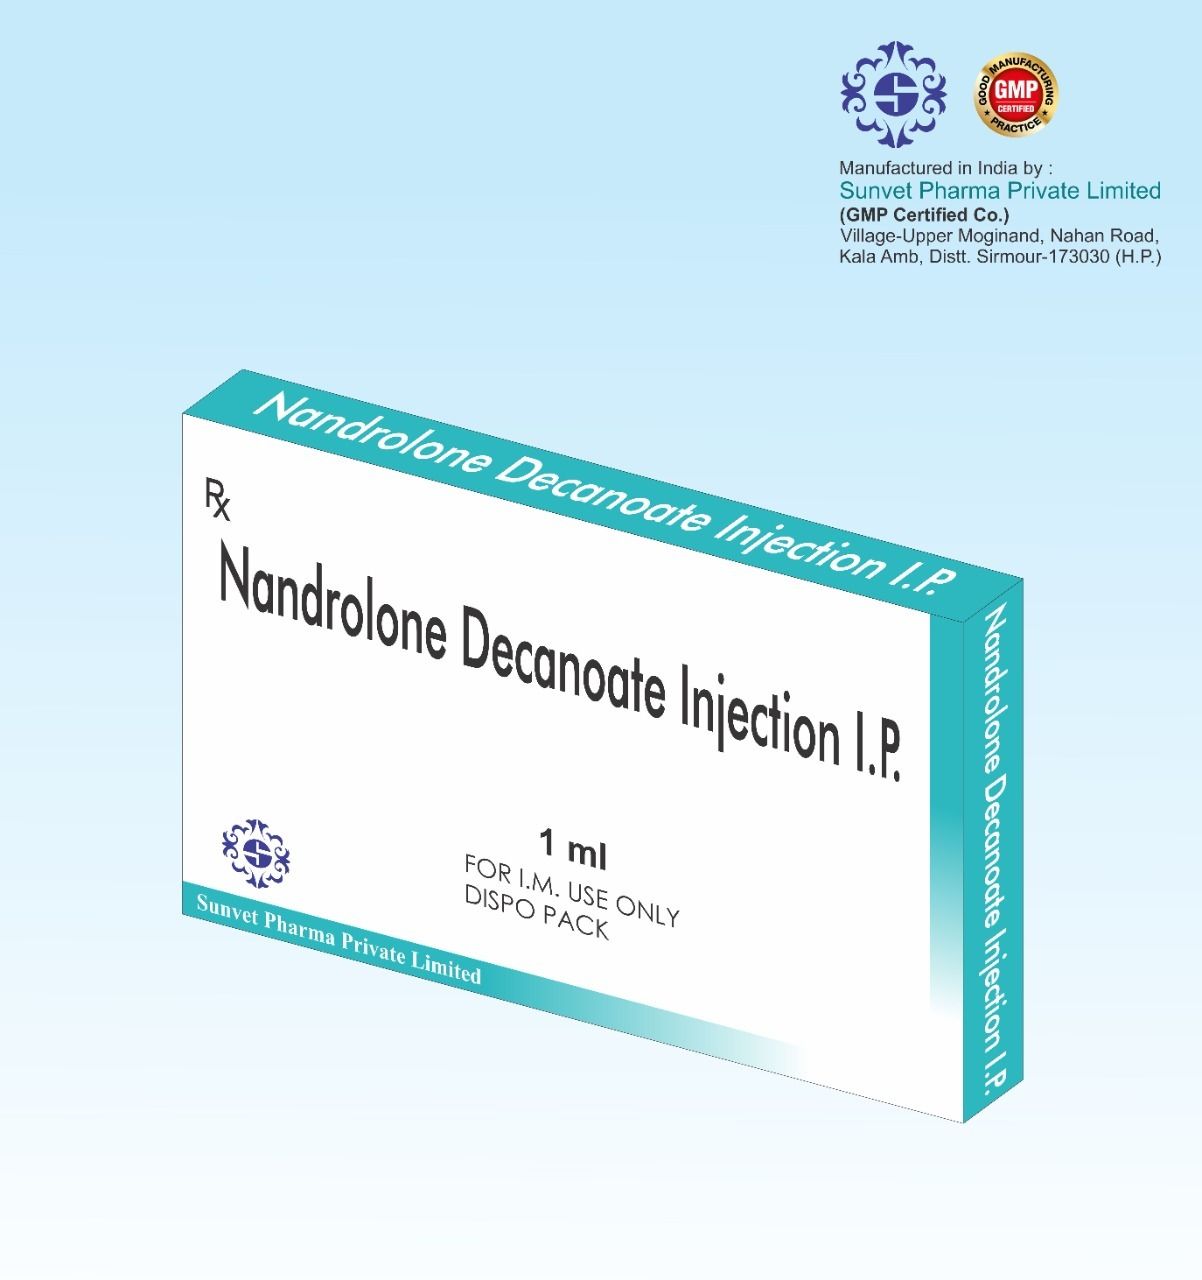 ONDANSETRON INJECTION IN THIRD PARTY MANUFACTURING